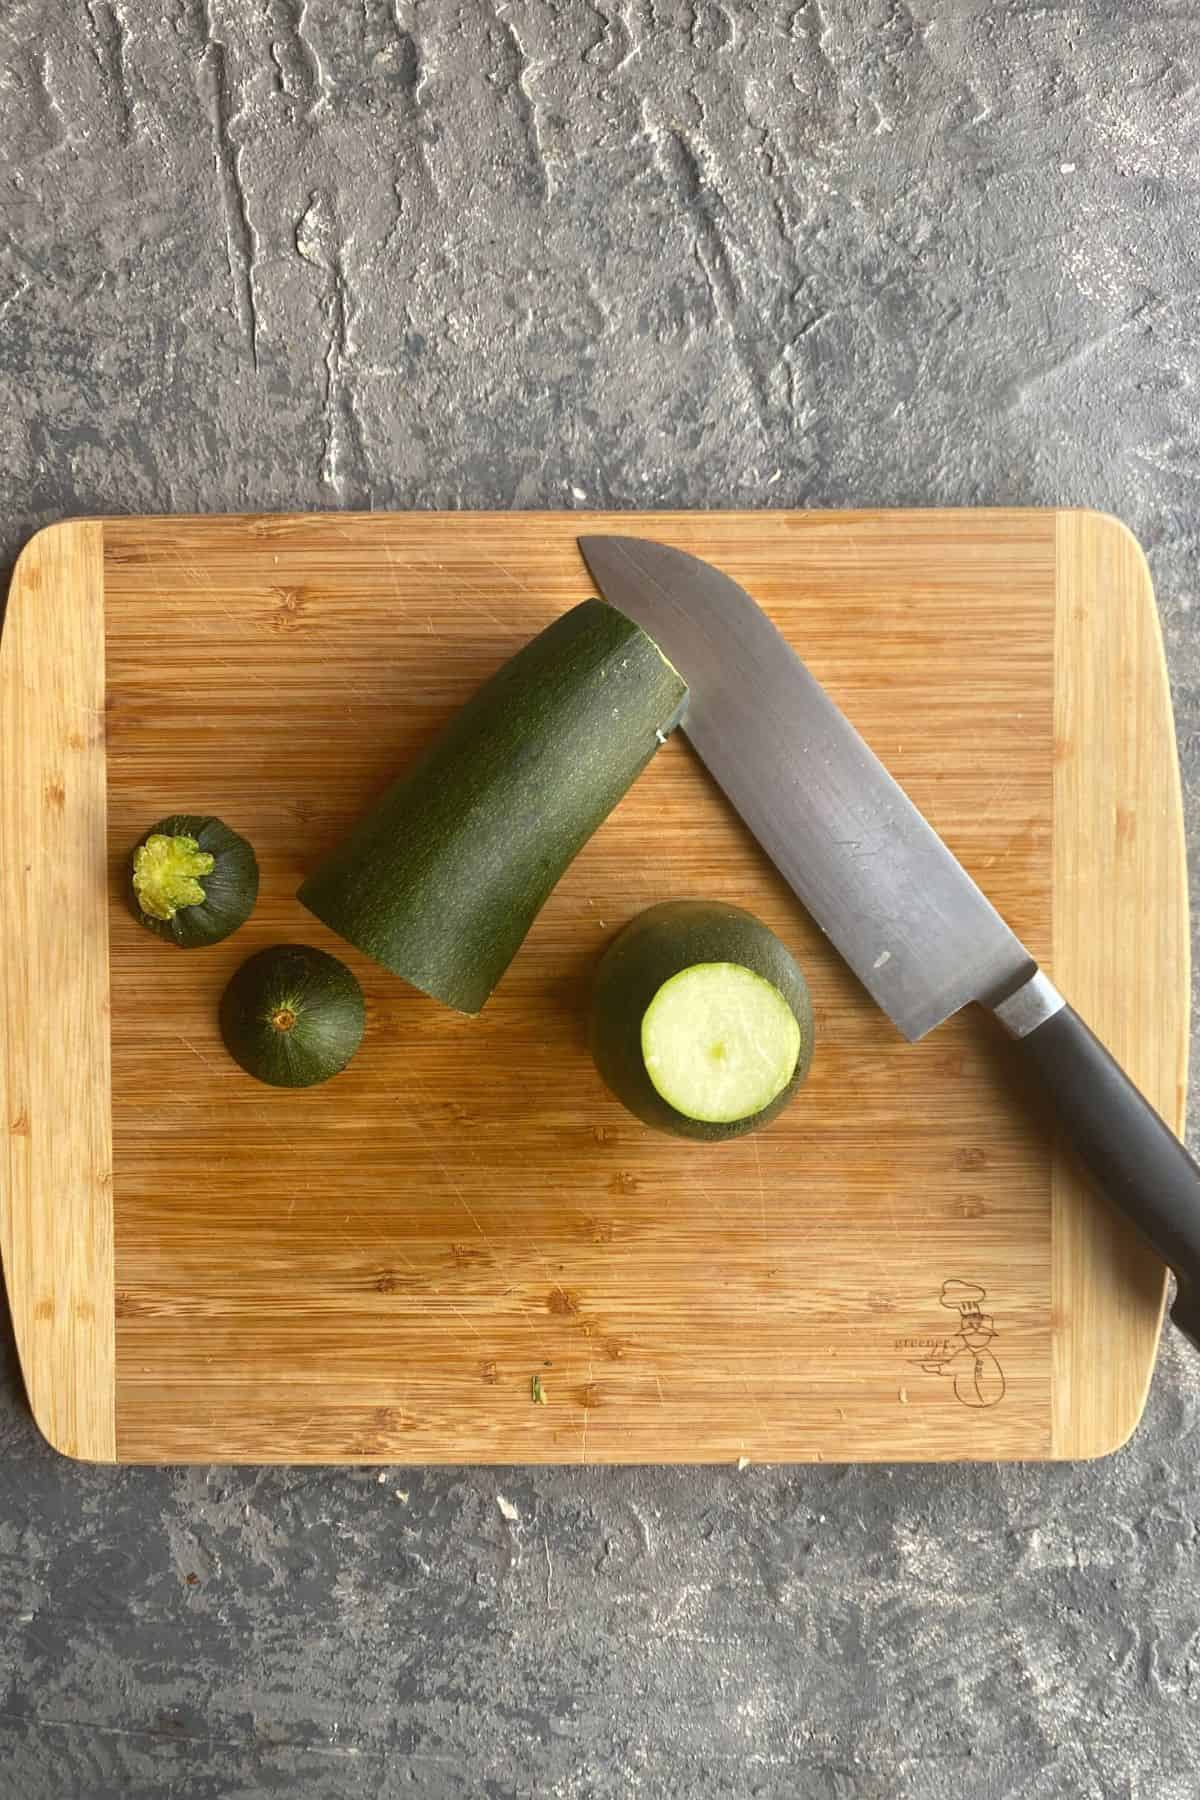 An overhead view of a cutting board with zucchini and three rounds cut off